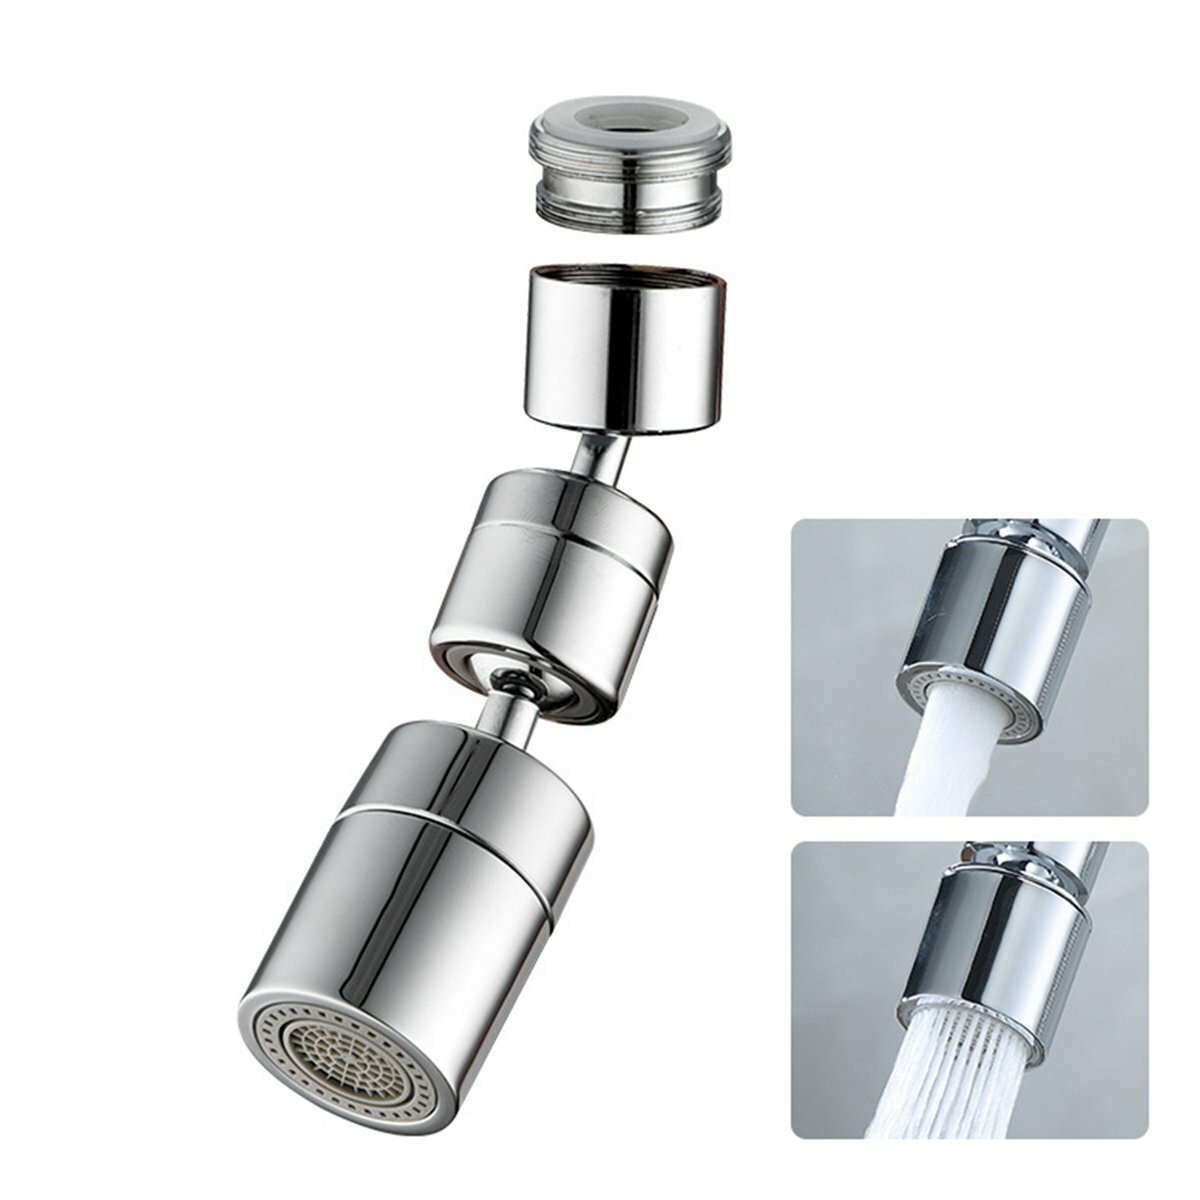 

Universal Extender Splash Filter Faucet 1080° Rotate Water Outlet Faucet Silver